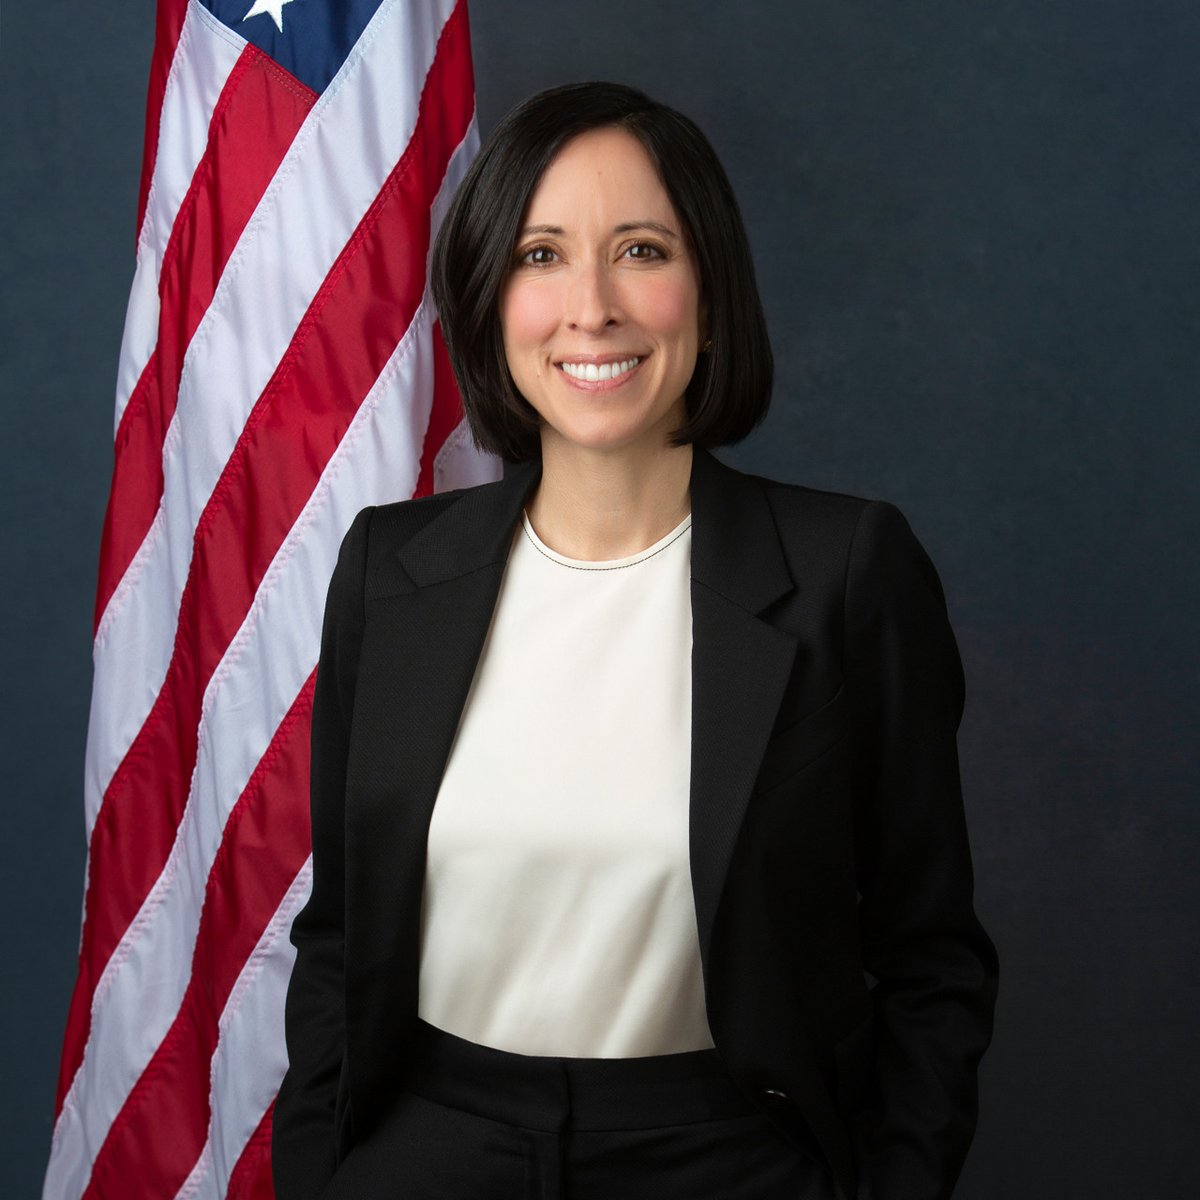 Historical Preservation & Cultural Heritage with Honorable Sara Bronin, Chair of the @usachp on the legal workings of the ACHP and historic preservation/cultural heritage law will take place on April 10th. Register to join in person or on Zoom: wcl.american.edu/impact/initiat… @AUWCL